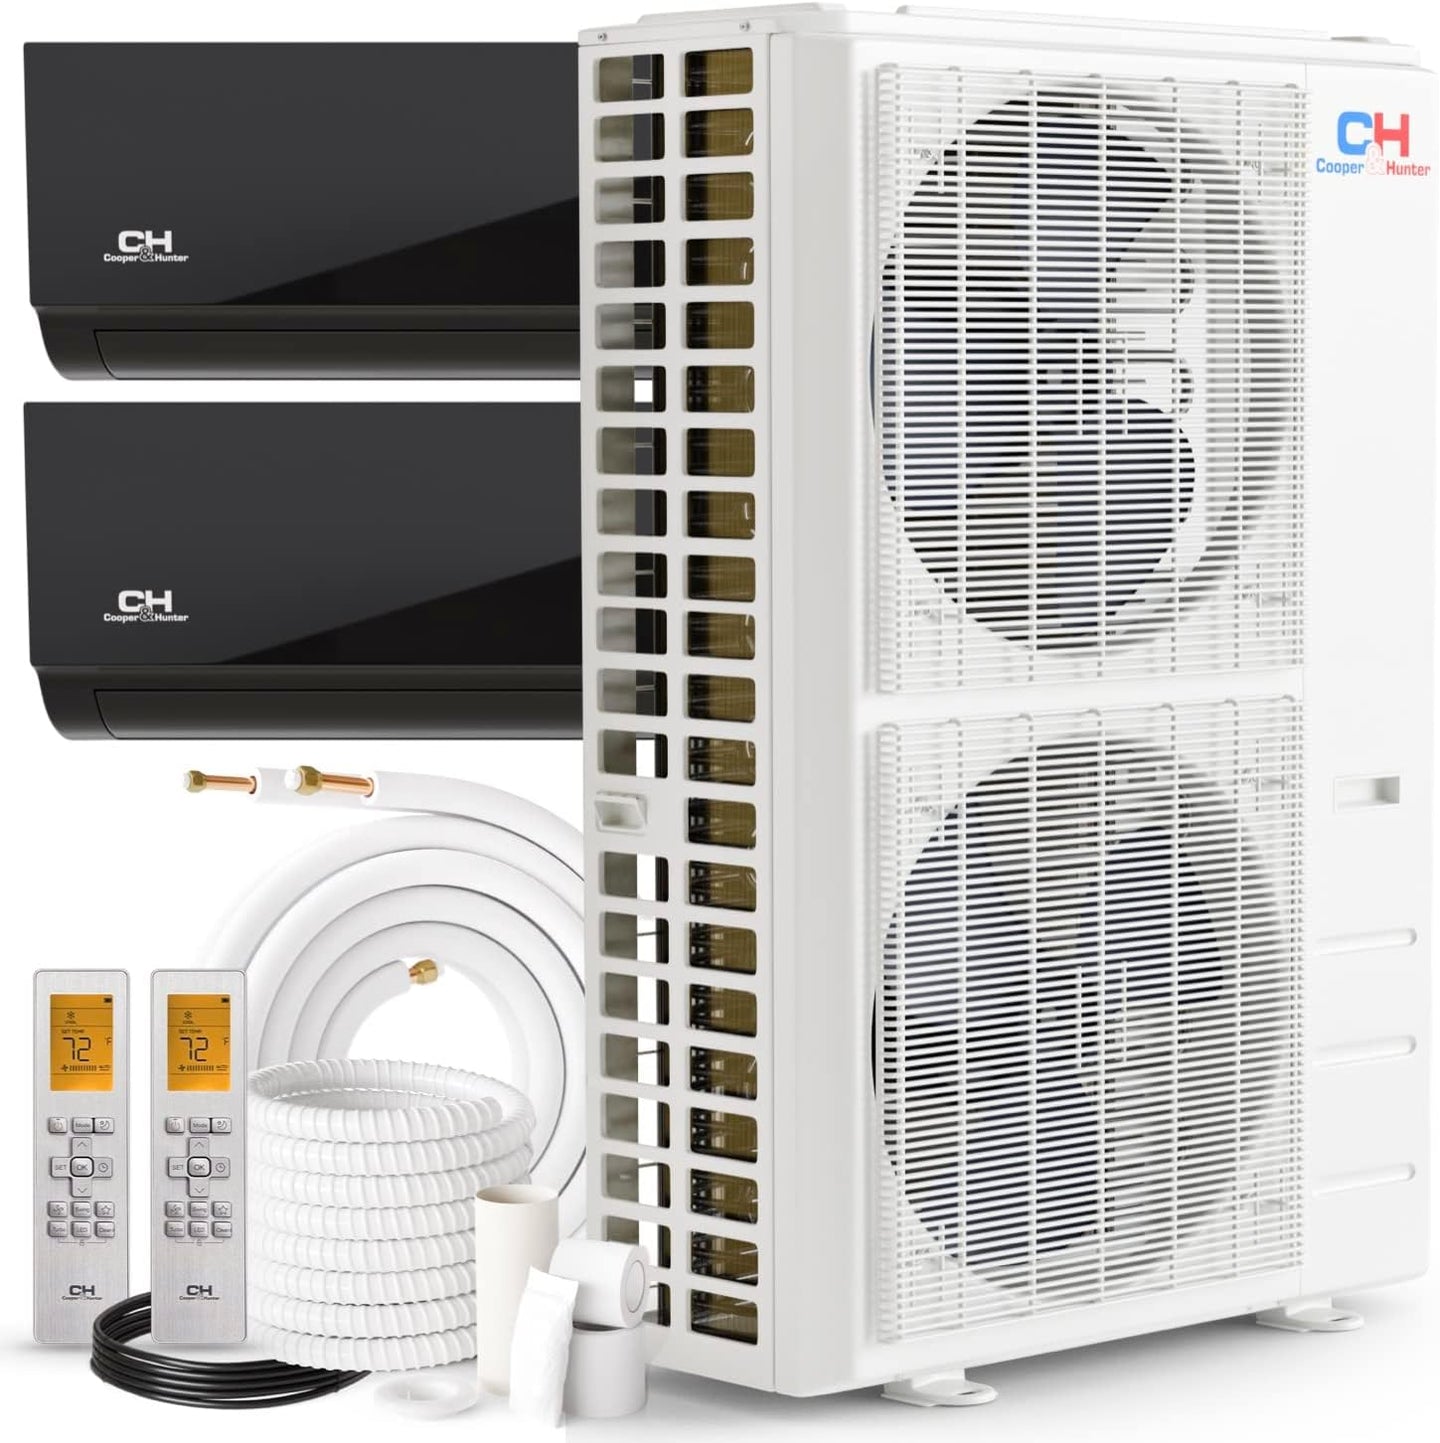 Cooper & Hunter 48,000 BTU Olivia Series, Midnight Edition, Dual Zone Compressor with 24000 + 24000 BTU Wall Mount Air Handlers Ductless Mini Split A/C and Heater Including Installation Kits